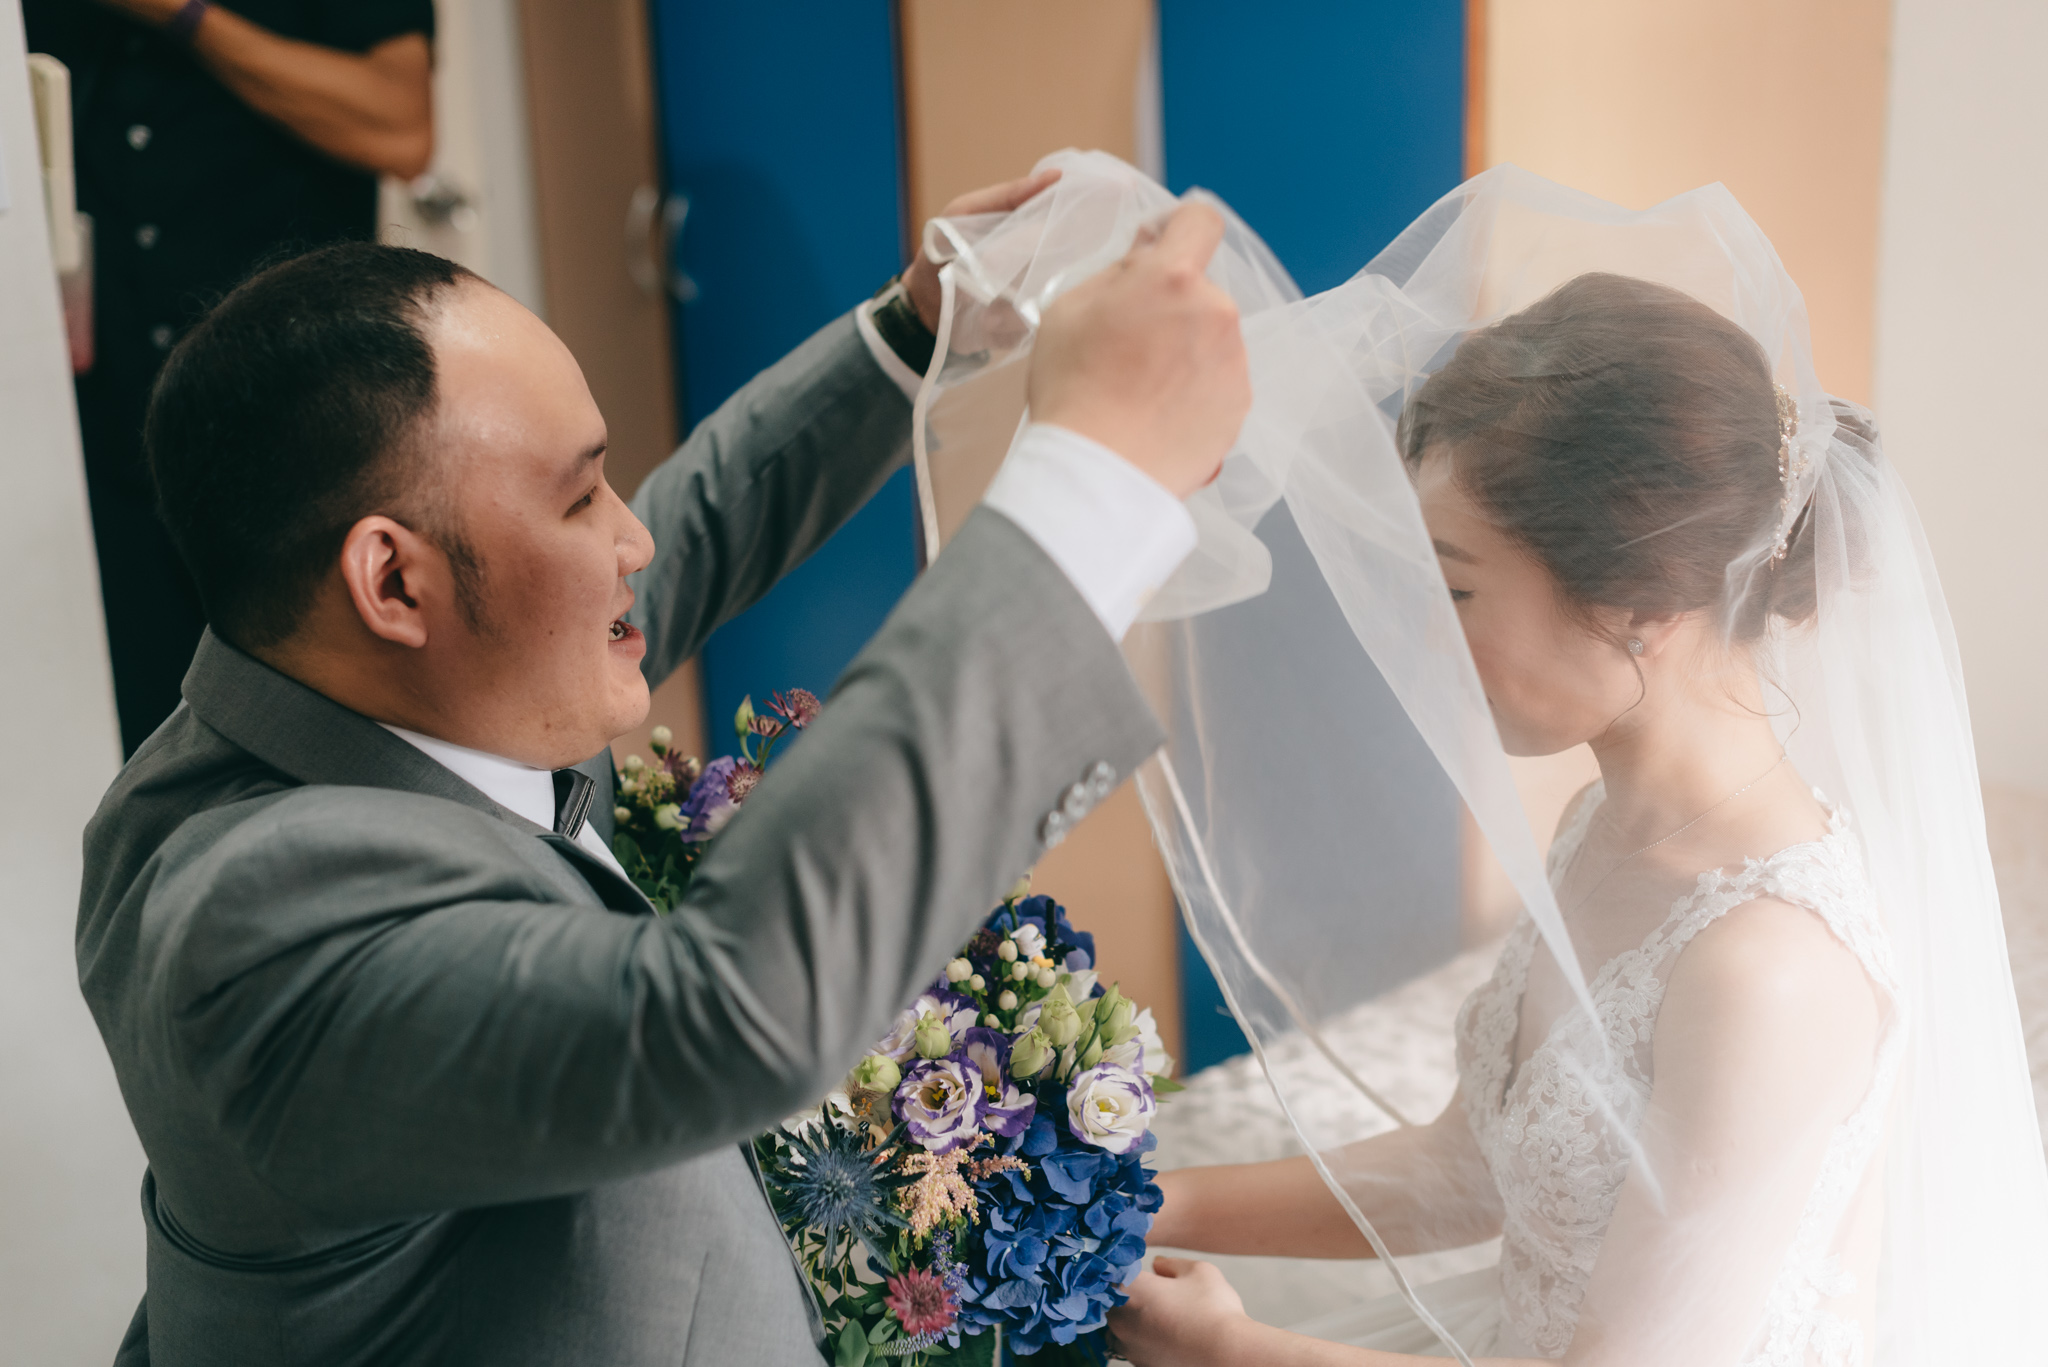 Eunice & Winshire Wedding Day Highlights (resized for sharing) - 063.jpg